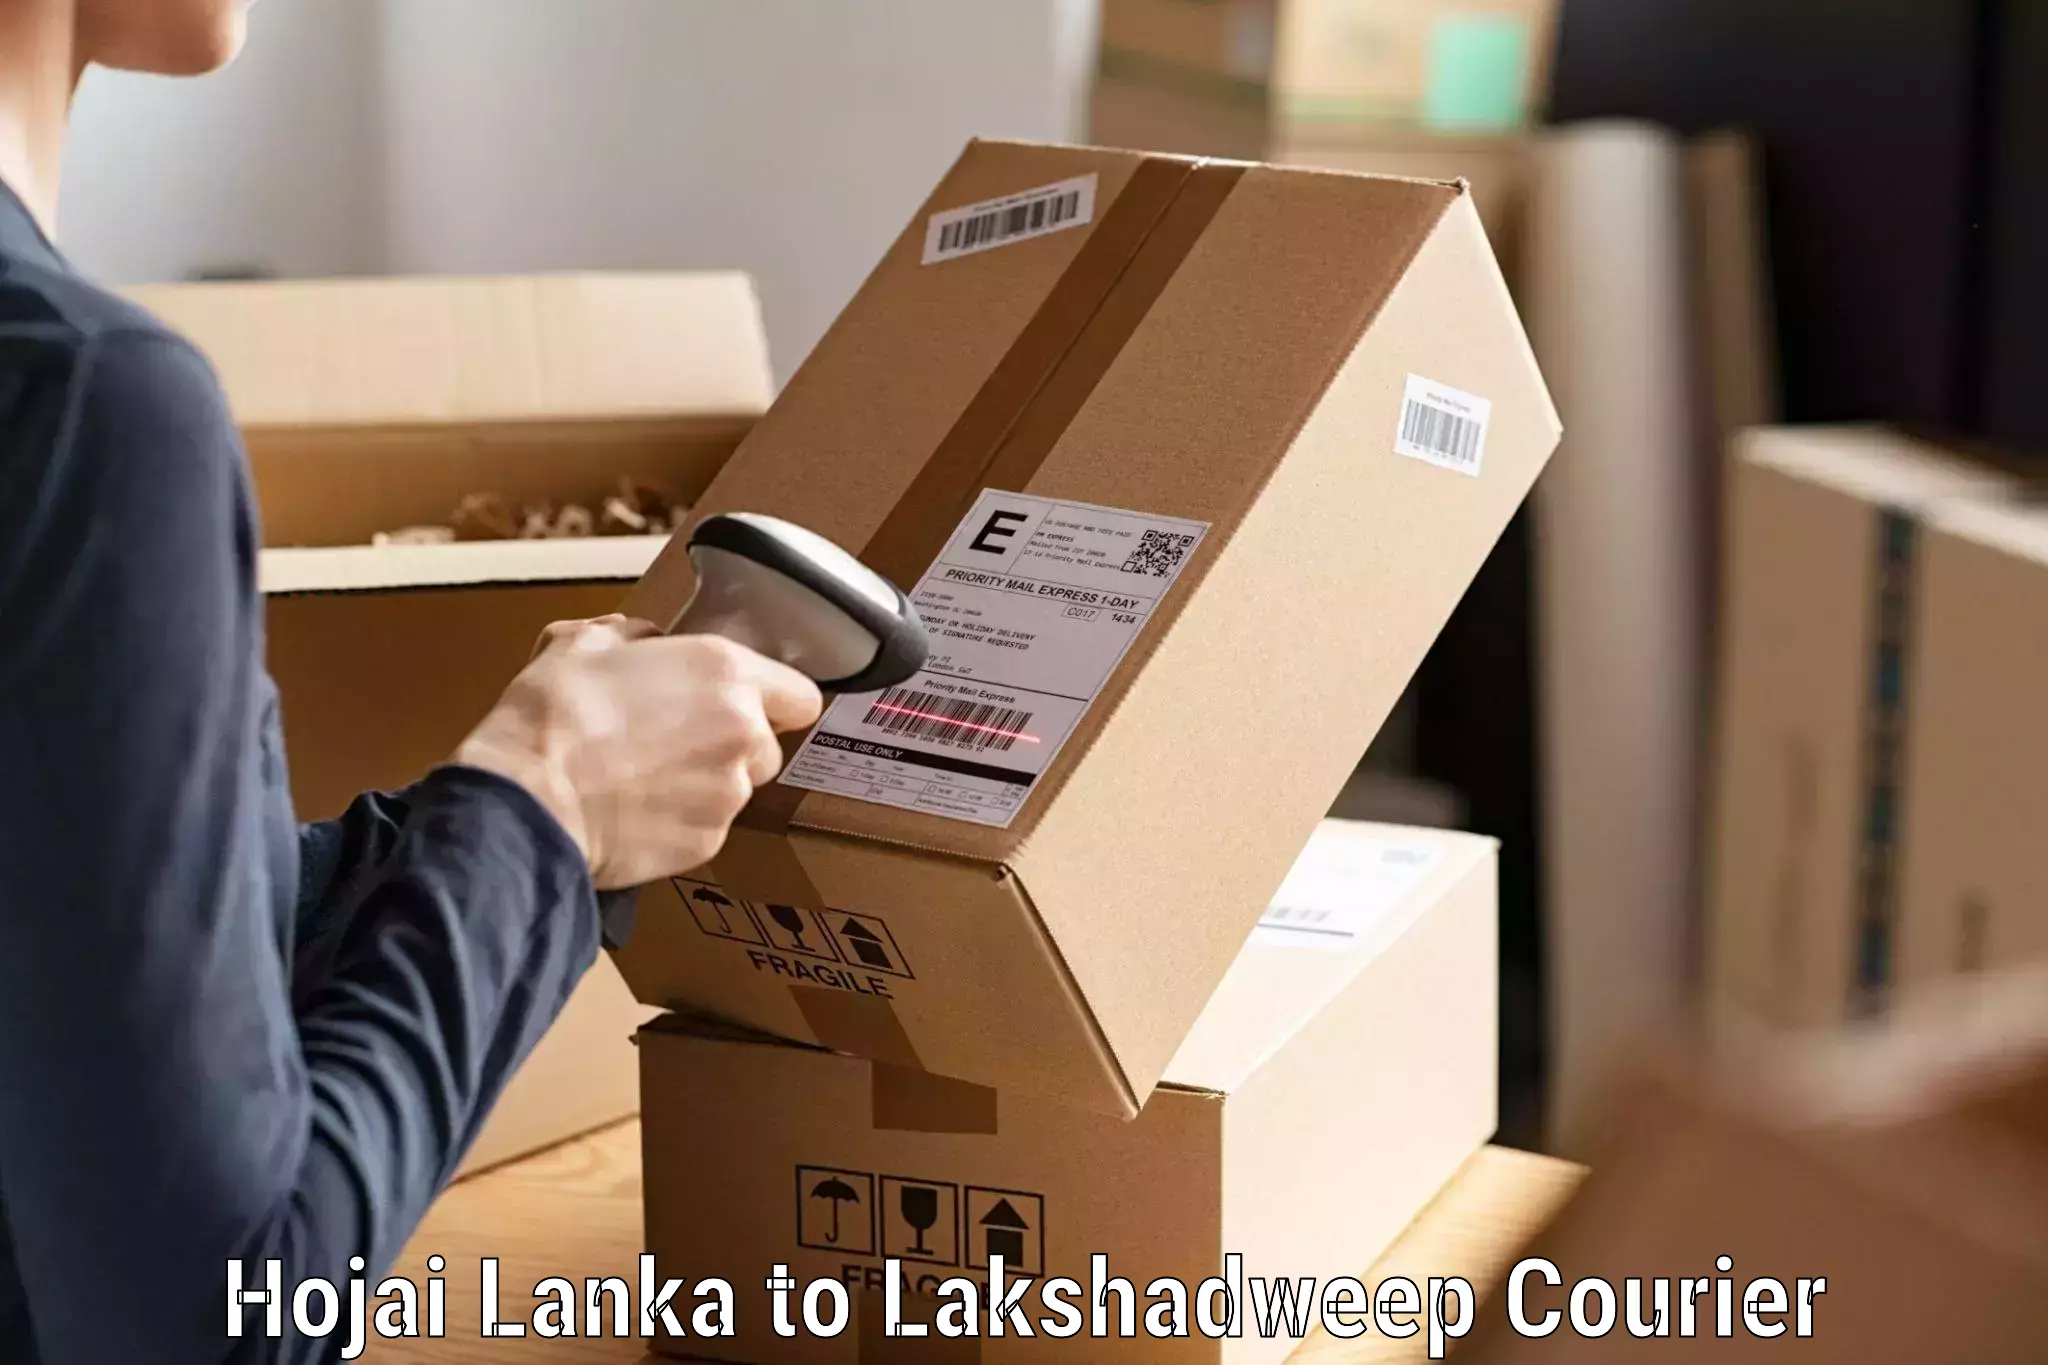 Multi-national courier services Hojai Lanka to Lakshadweep